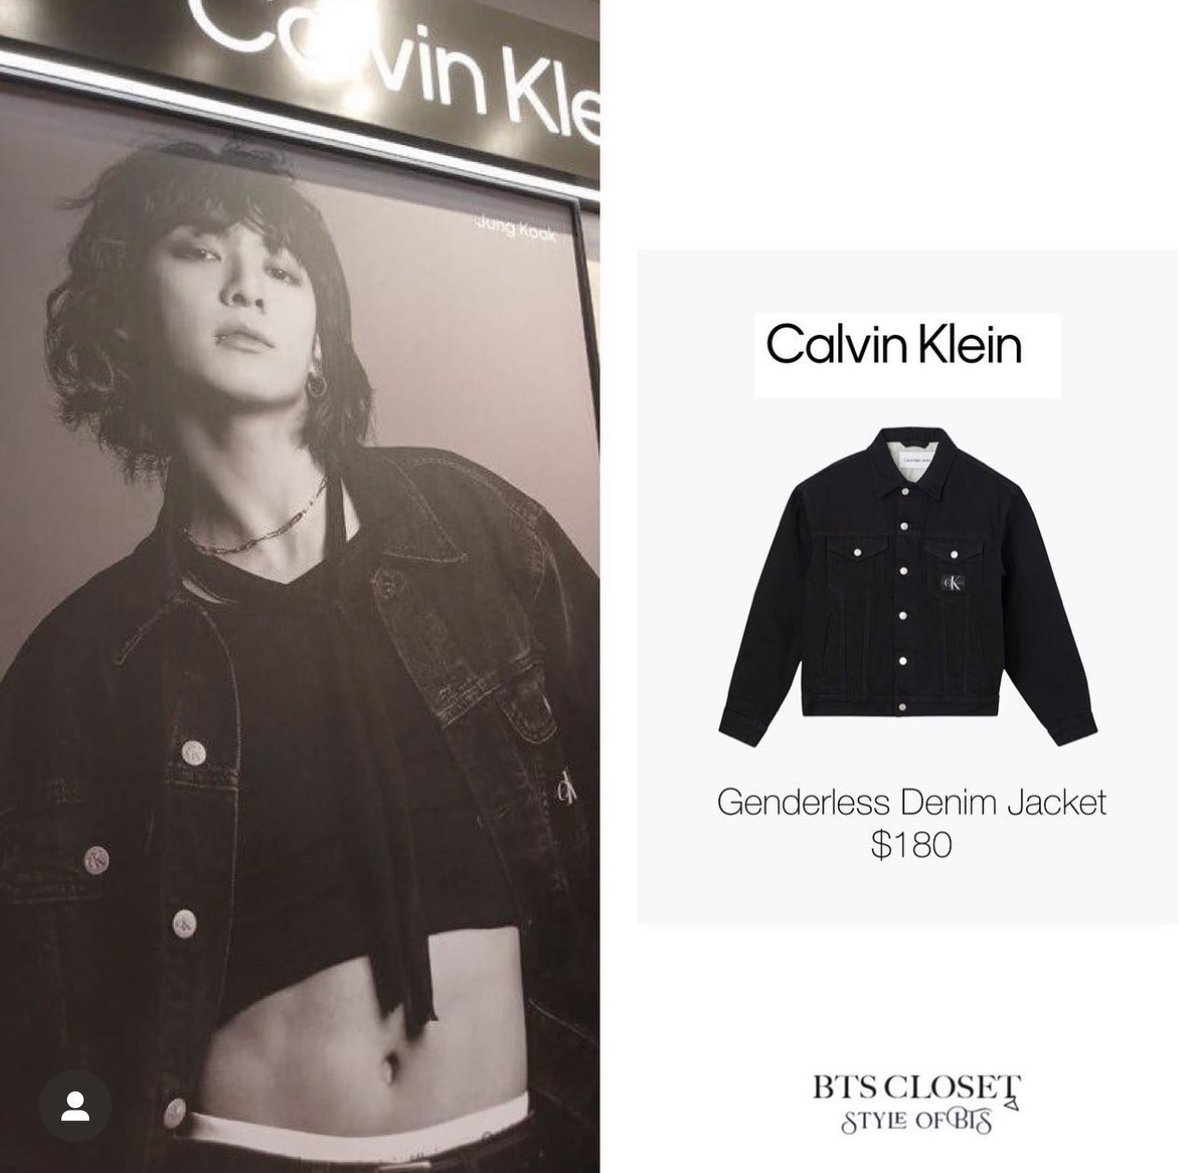 i wonder if it comes with a side of jungkook gender